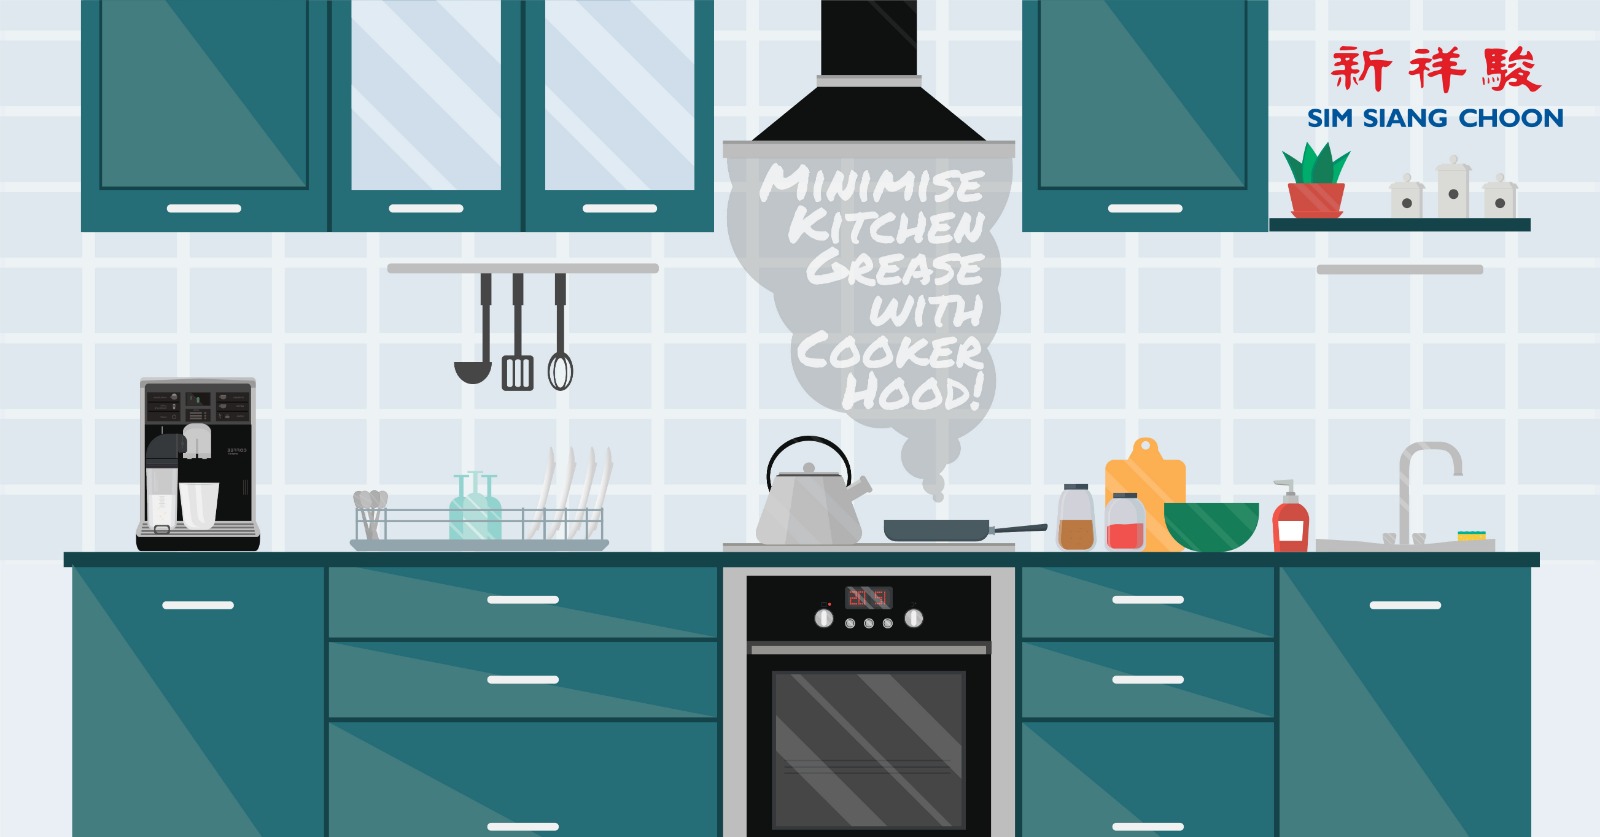 KITCHEN INNOVATION: MINIMISE KITCHEN GREASE WITH COOKER HOOD